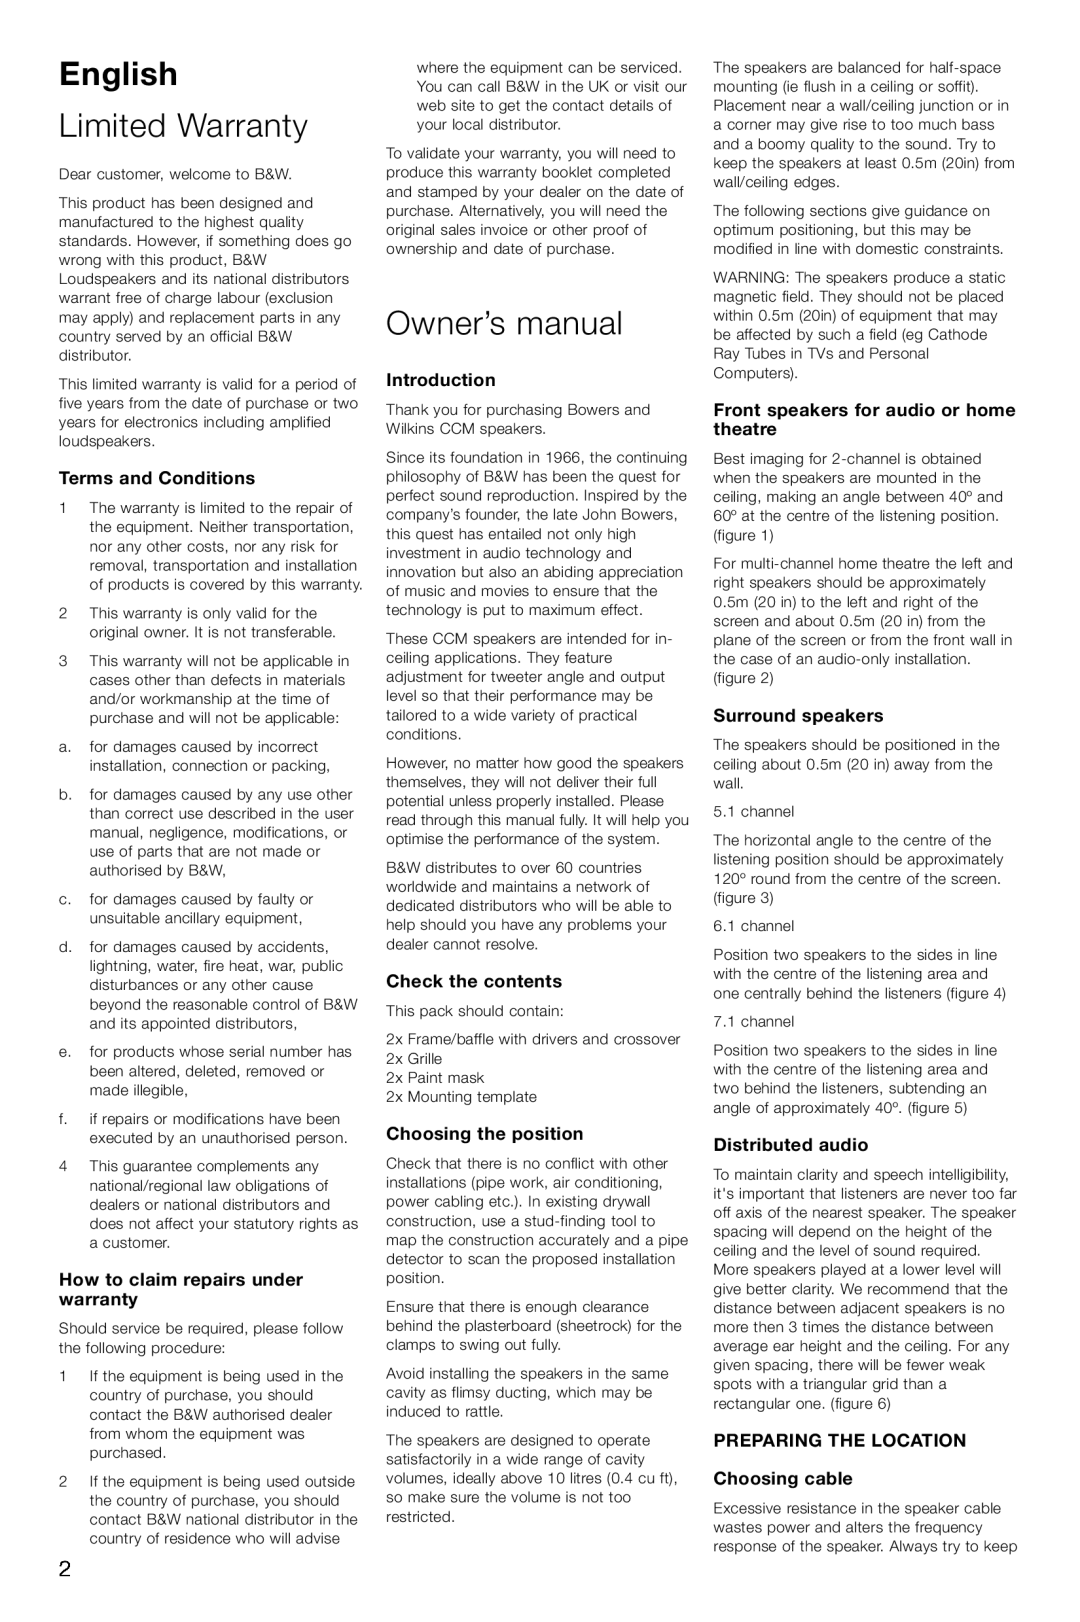 Bowers & Wilkins CCM-628 owner manual English, Limited Warranty, Terms and Conditions, How to claim repairs under warranty 